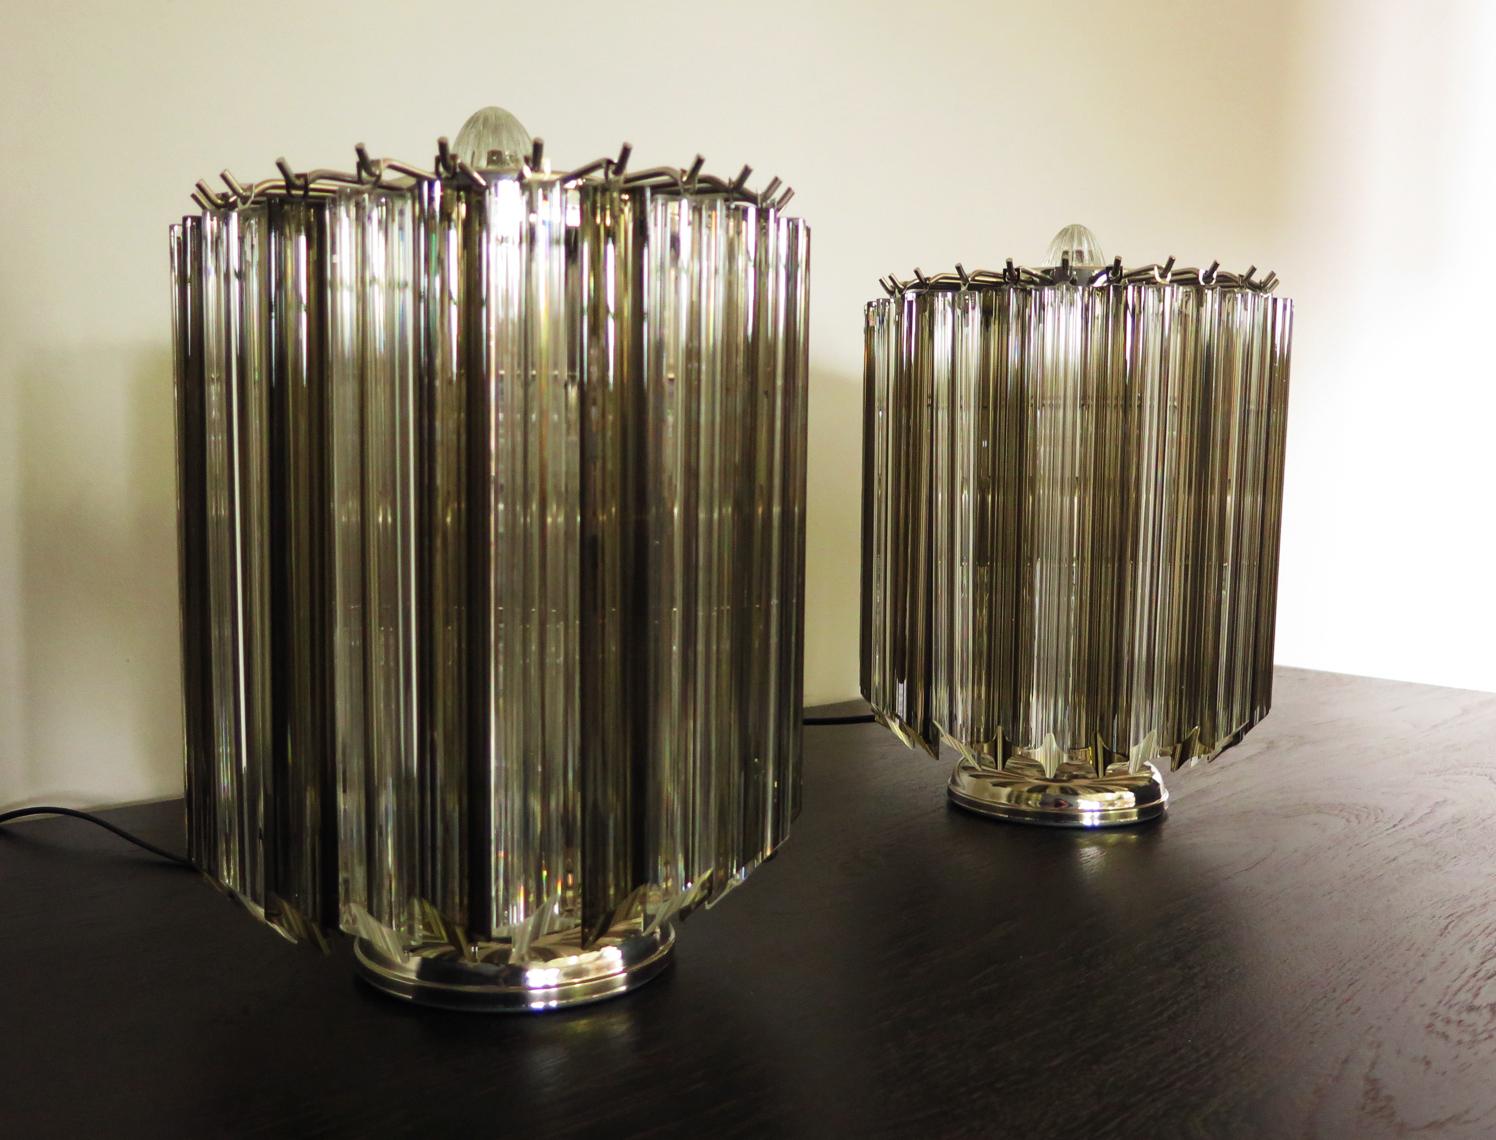 Pair of Table Lamps, 24 Transparent and Smoked Quadriedri, Murano, 1990s For Sale 7